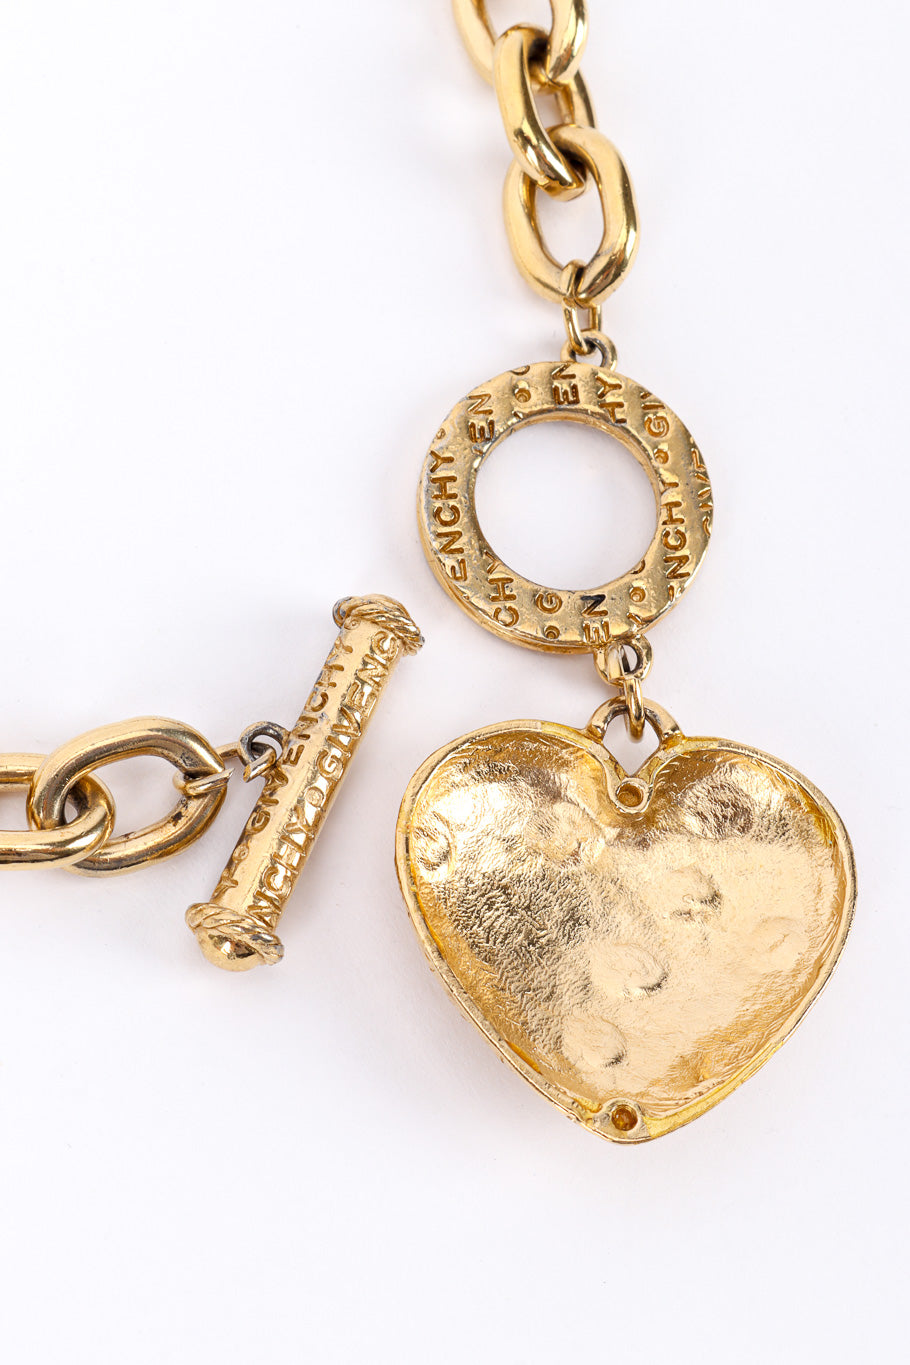 Heart charm necklace by Givenchy on white background inside heart @recessla